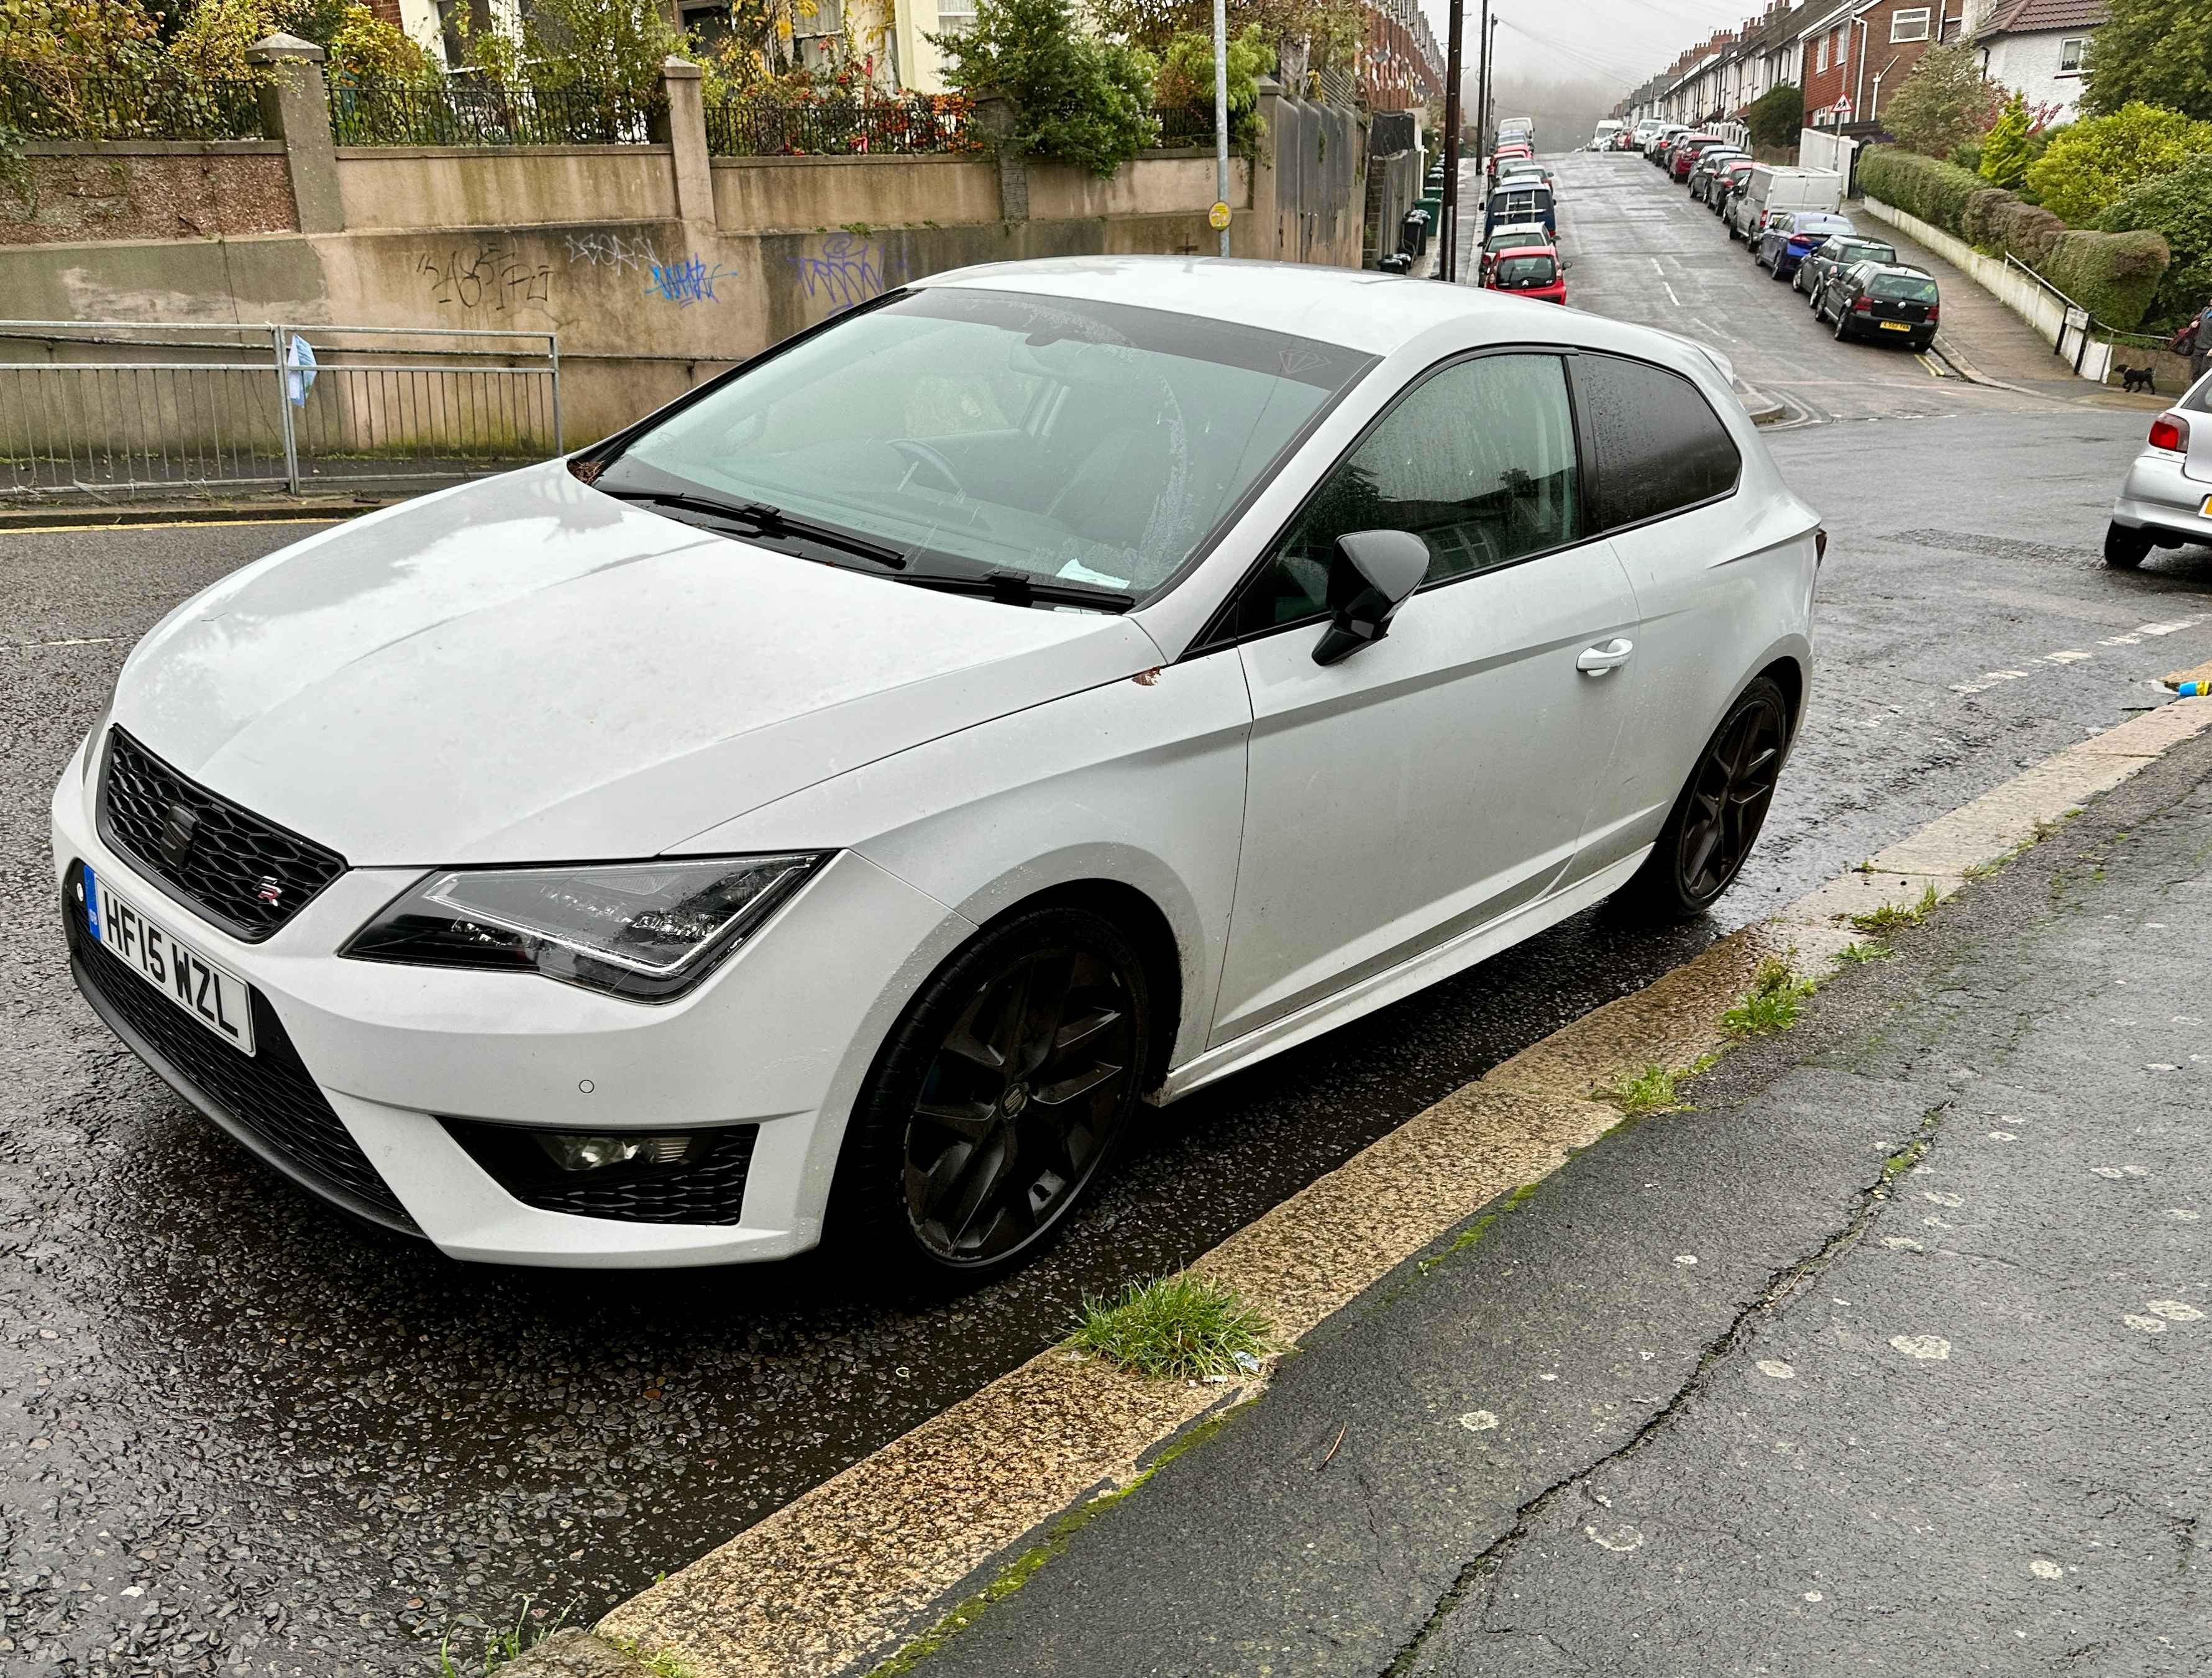 Photograph of HF15 WZL - a White Seat Leon parked in Hollingdean by a non-resident. The second of three photographs supplied by the residents of Hollingdean.